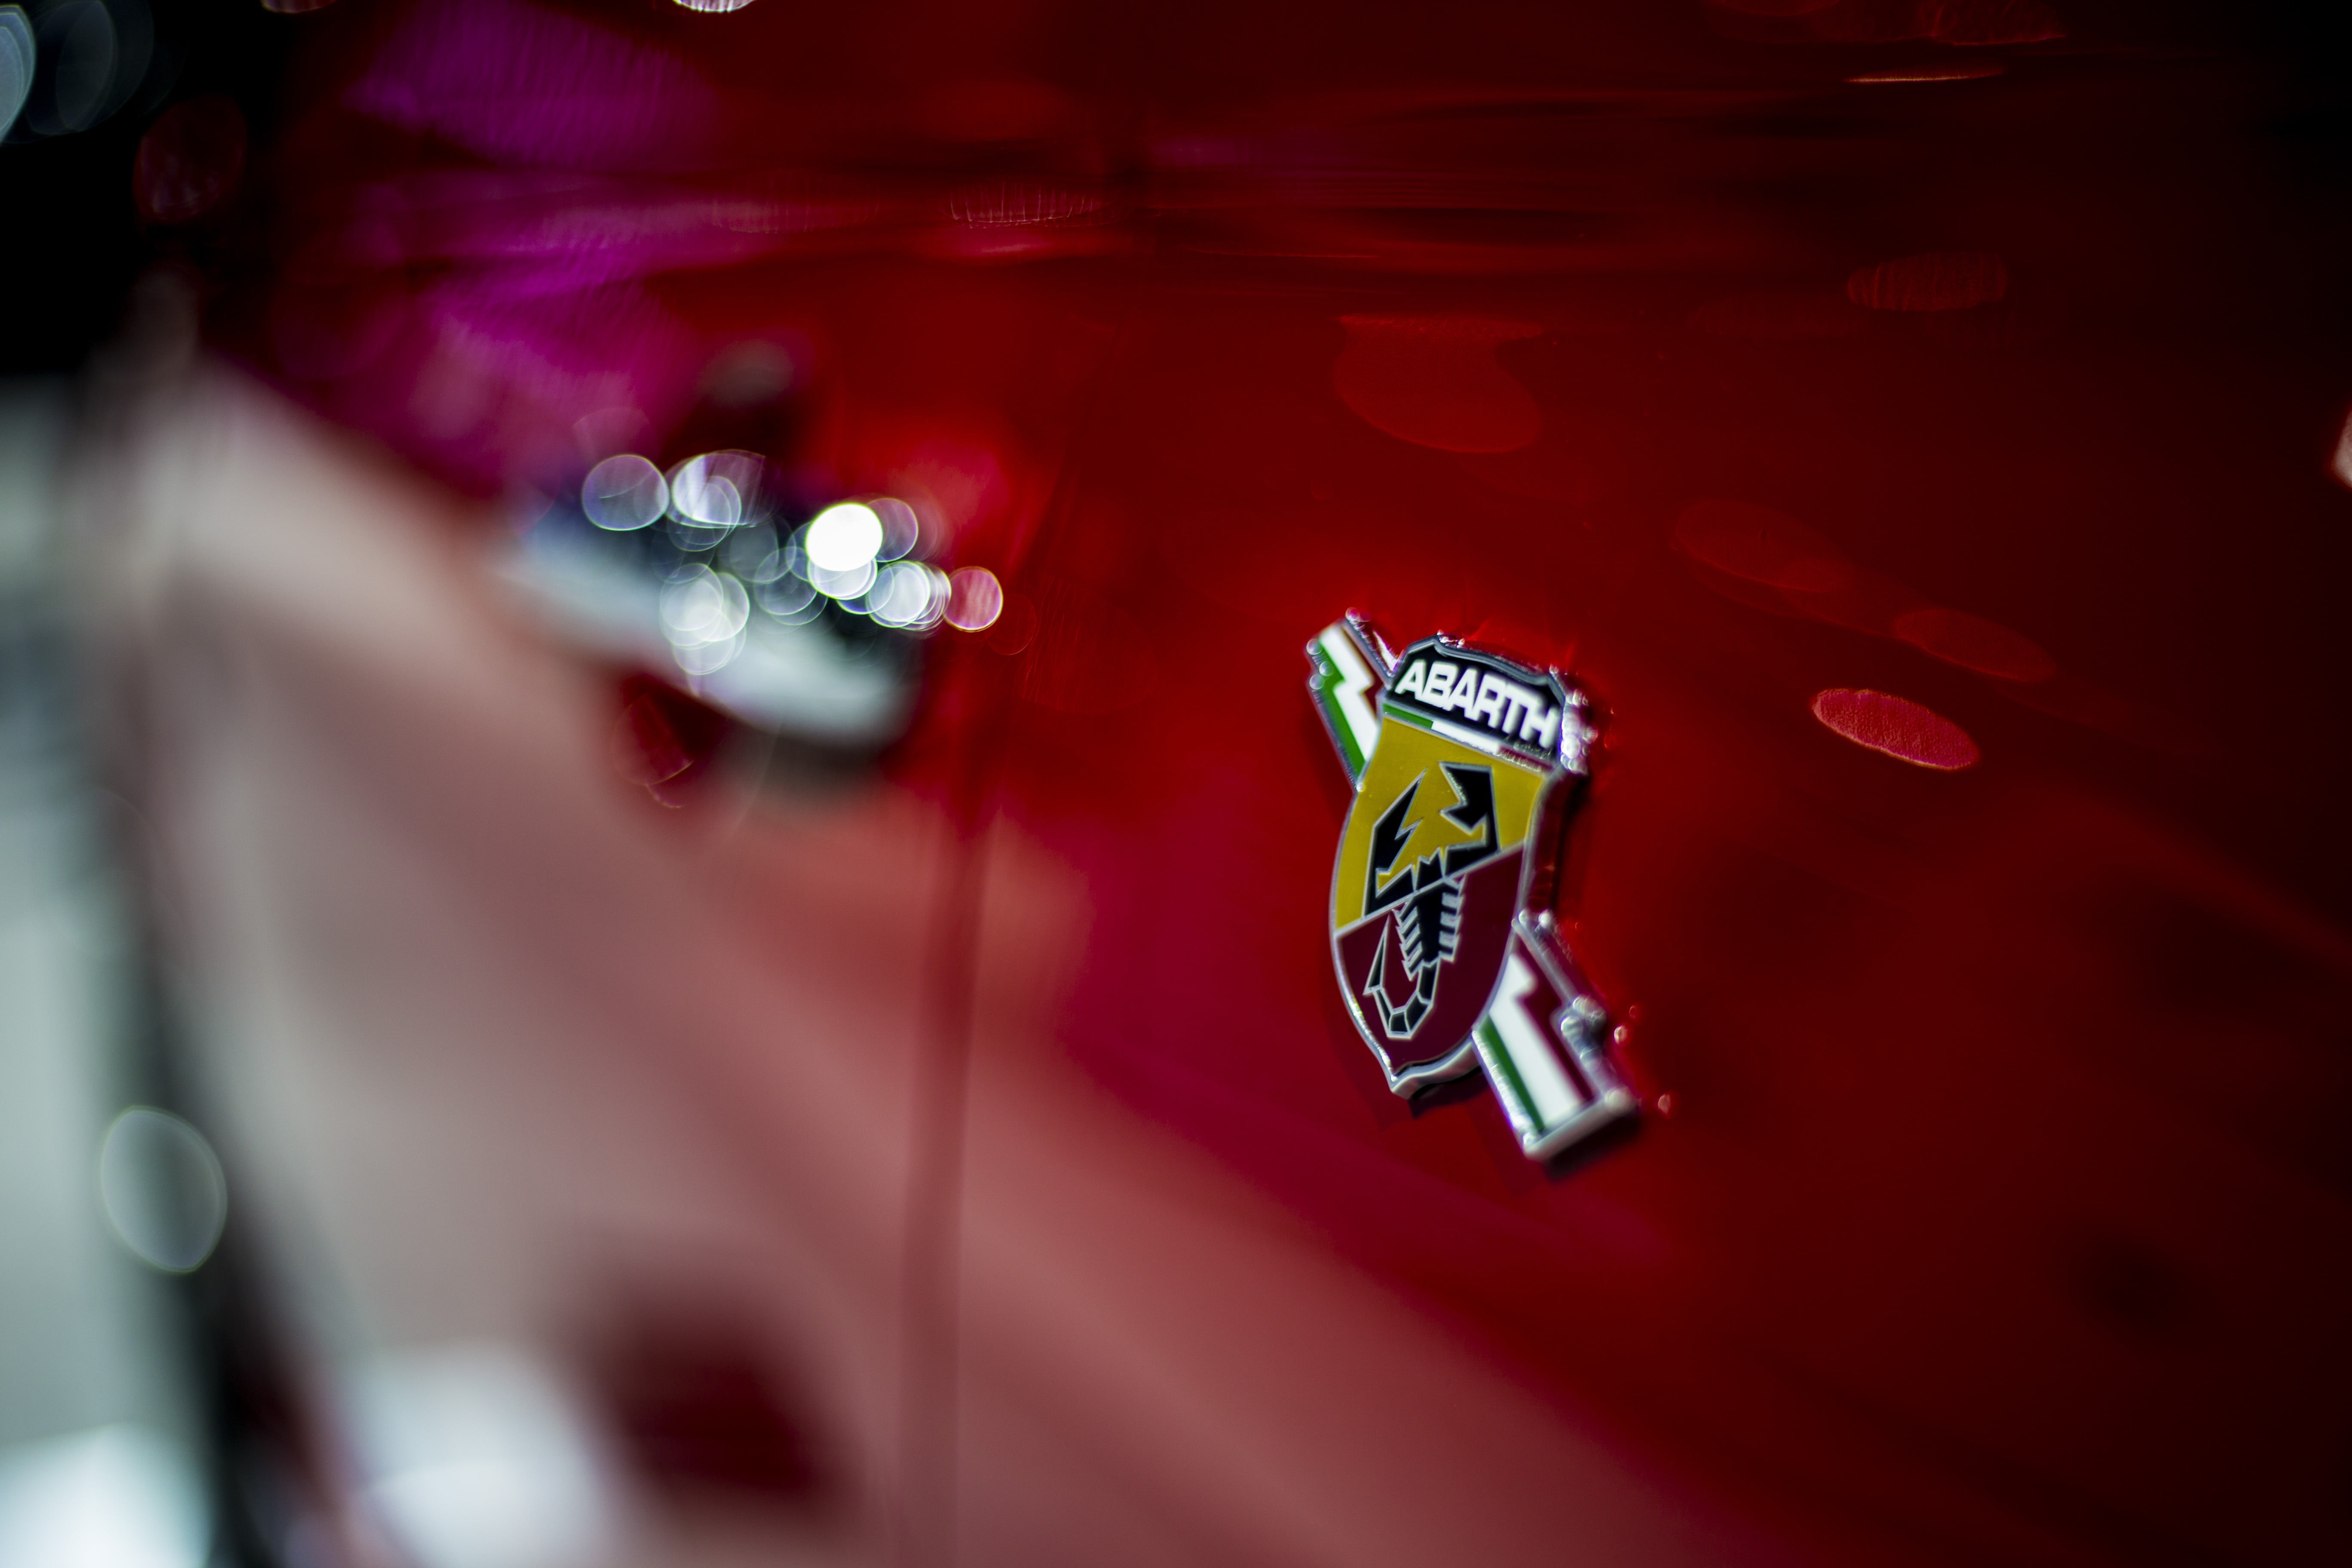 Fiat 500 Abarth, car, blurred, red cars, technology, communication